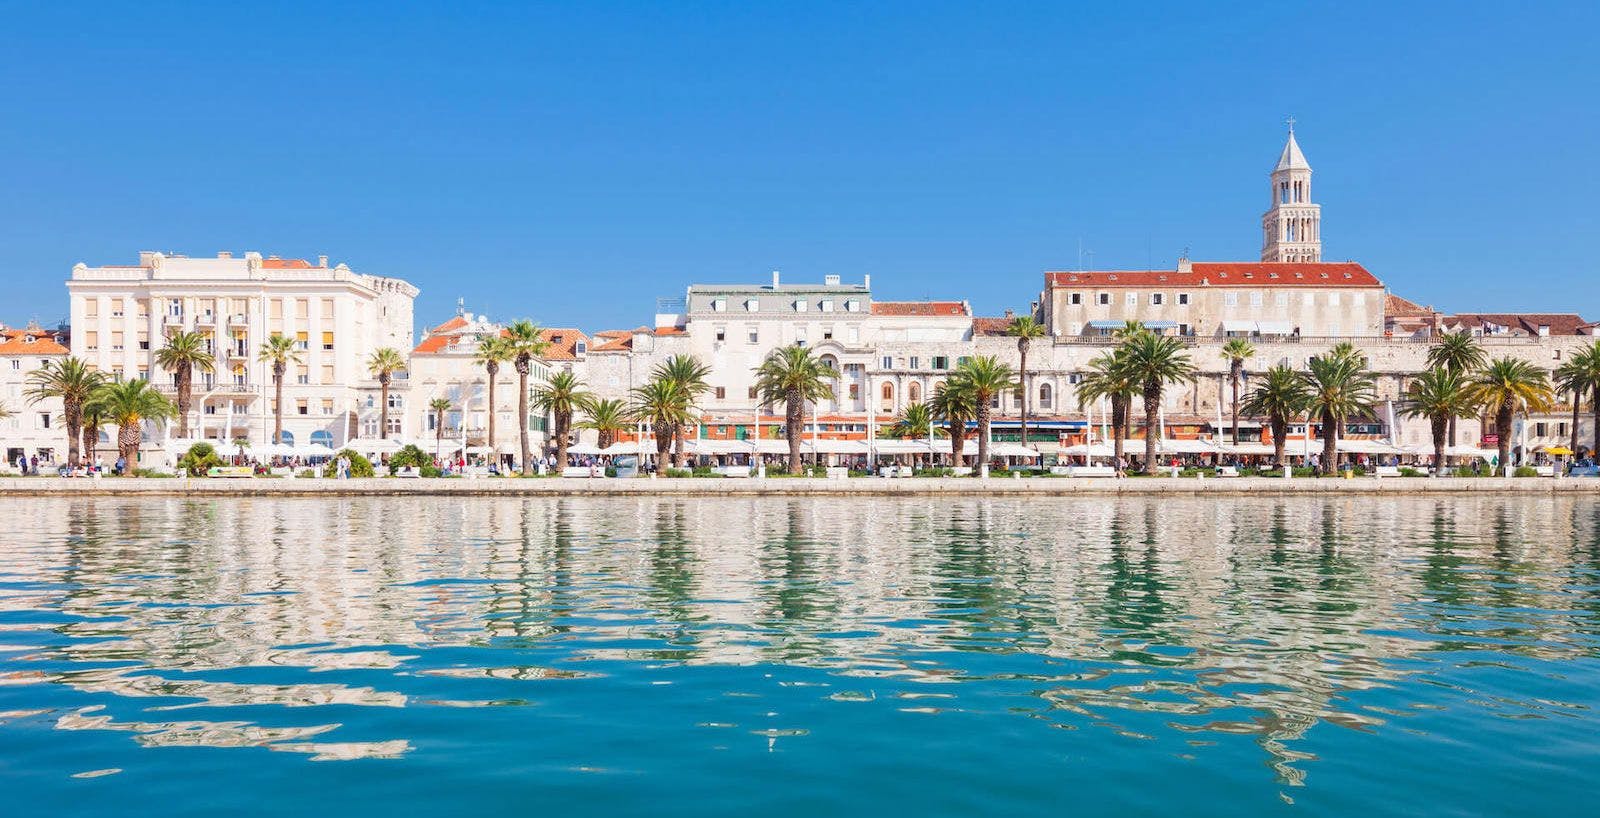 A traditional Croatian town by the sea